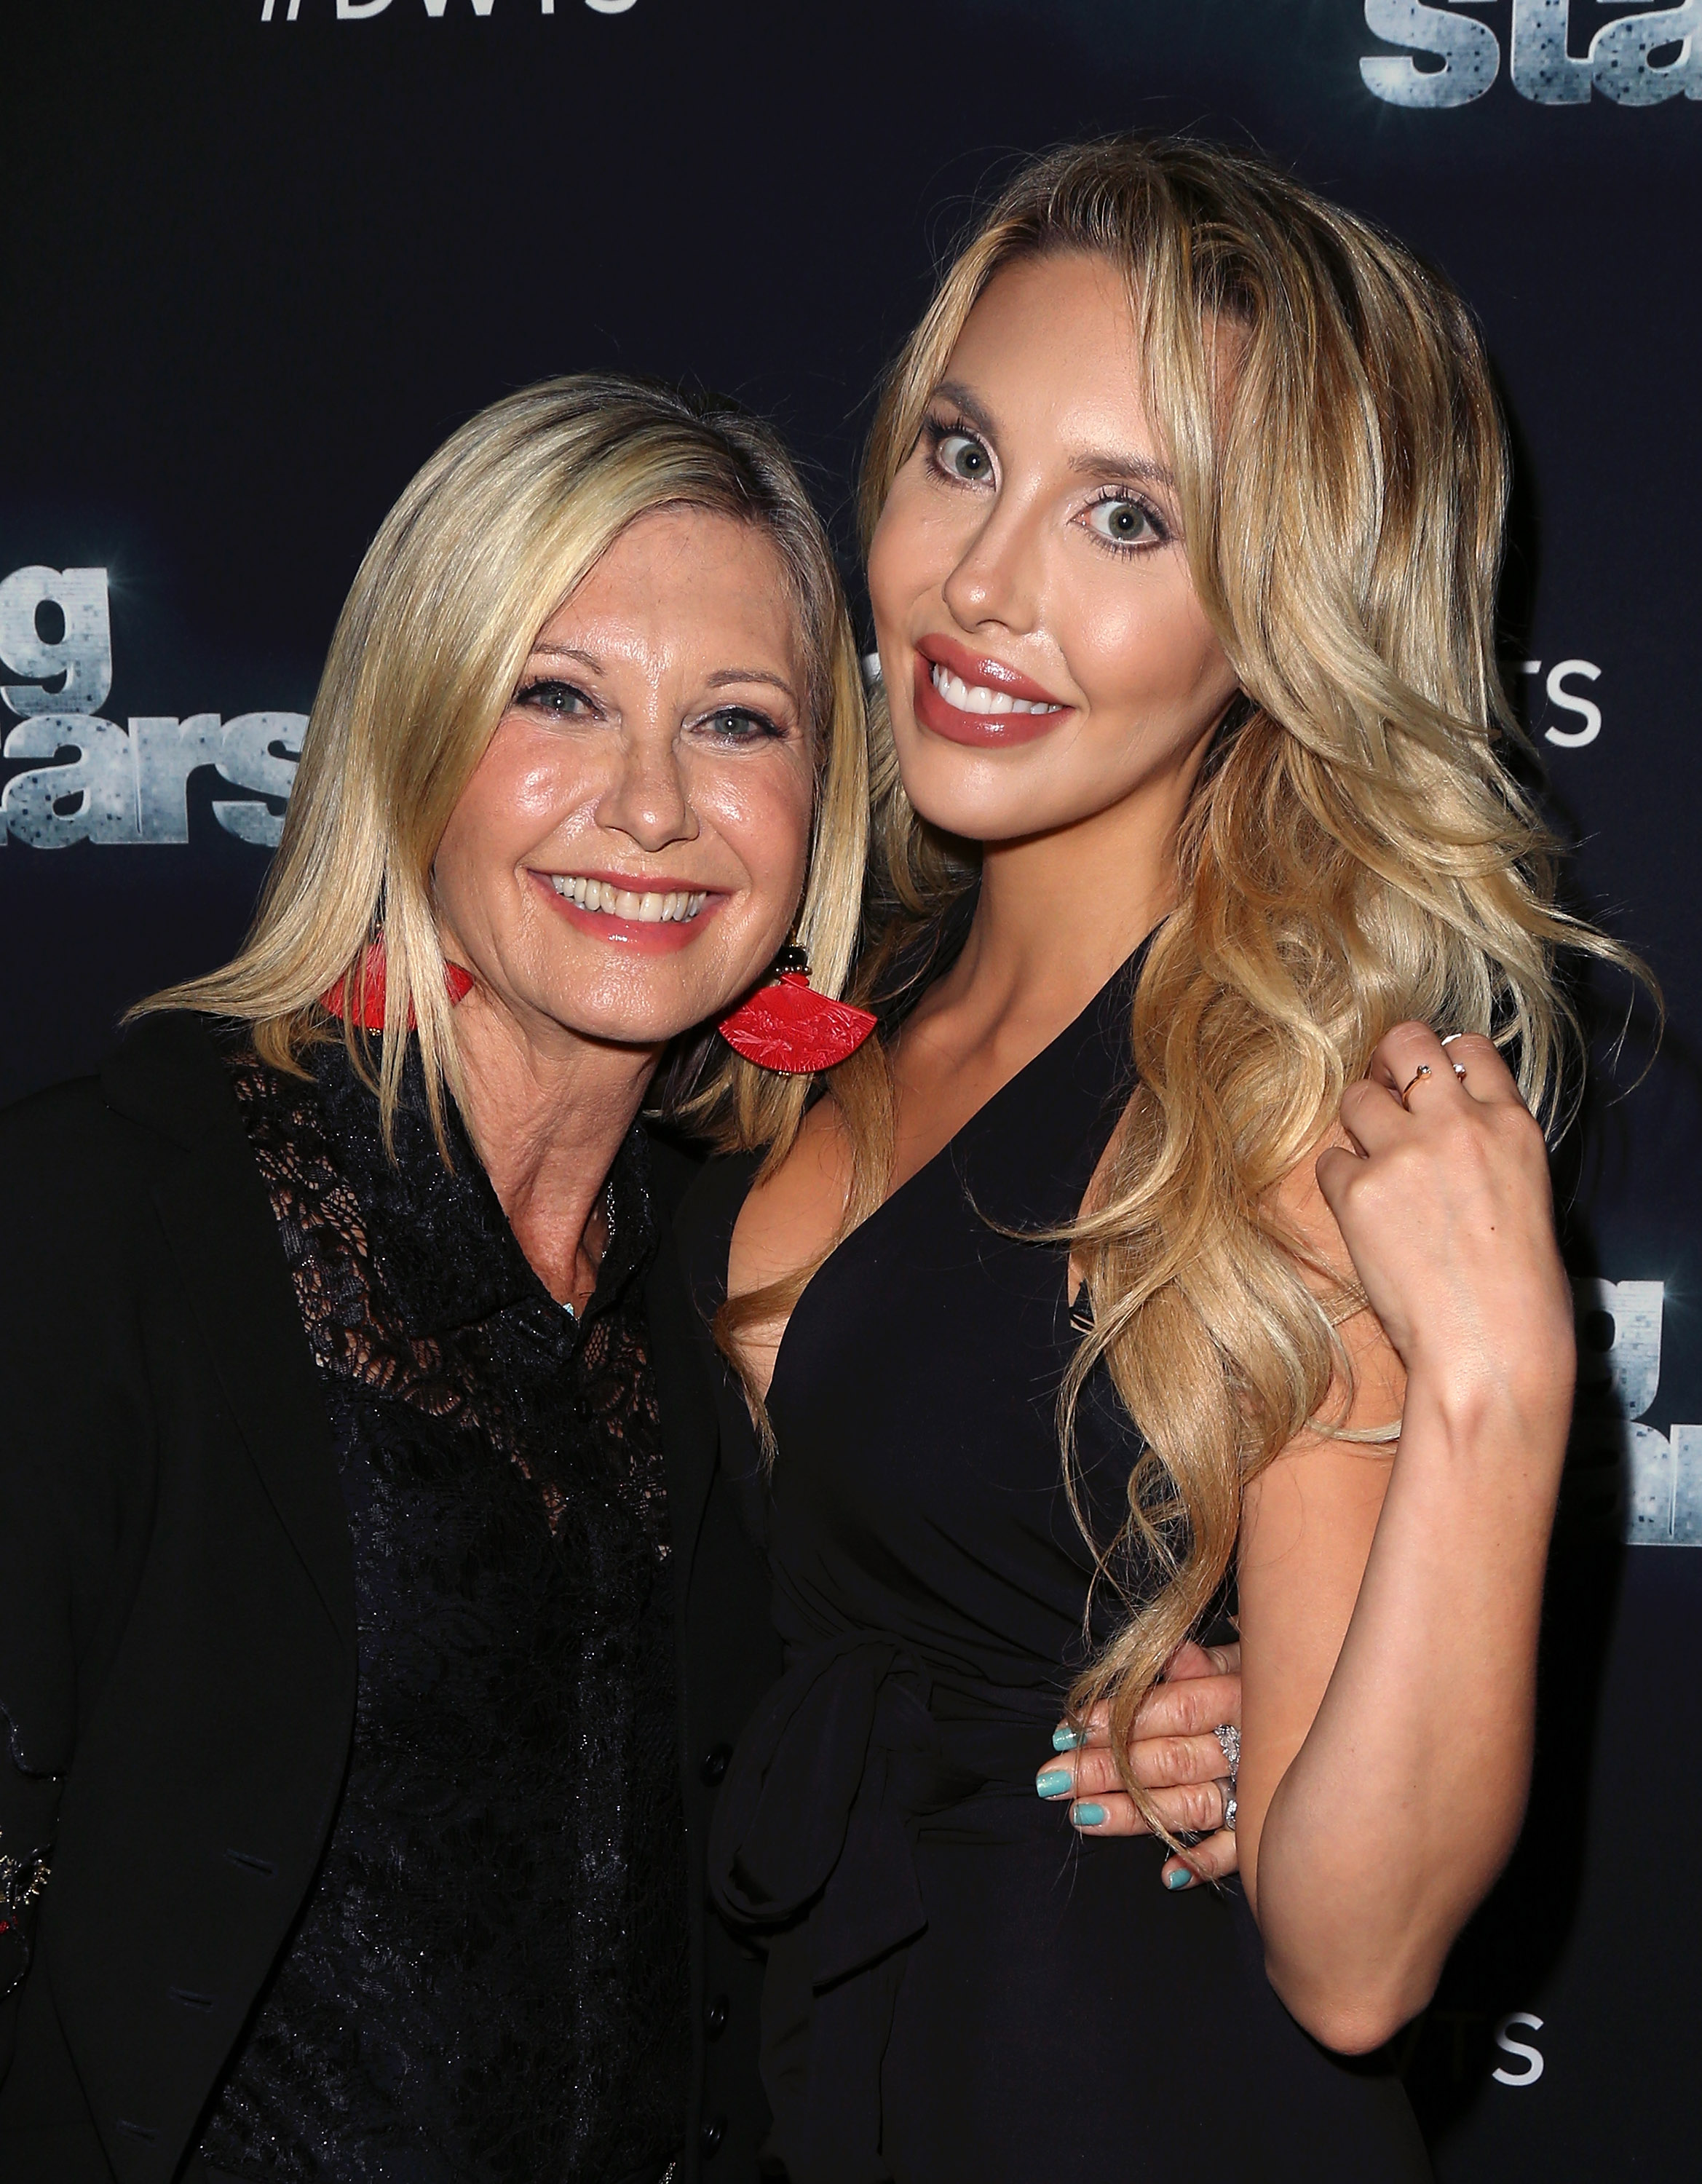 Olivia Newton-John and Chloe Lattanzi attend 'Dancing with the Stars' Season 21 in Los Angeles, California, on October 19, 2015. | Source: Getty Images